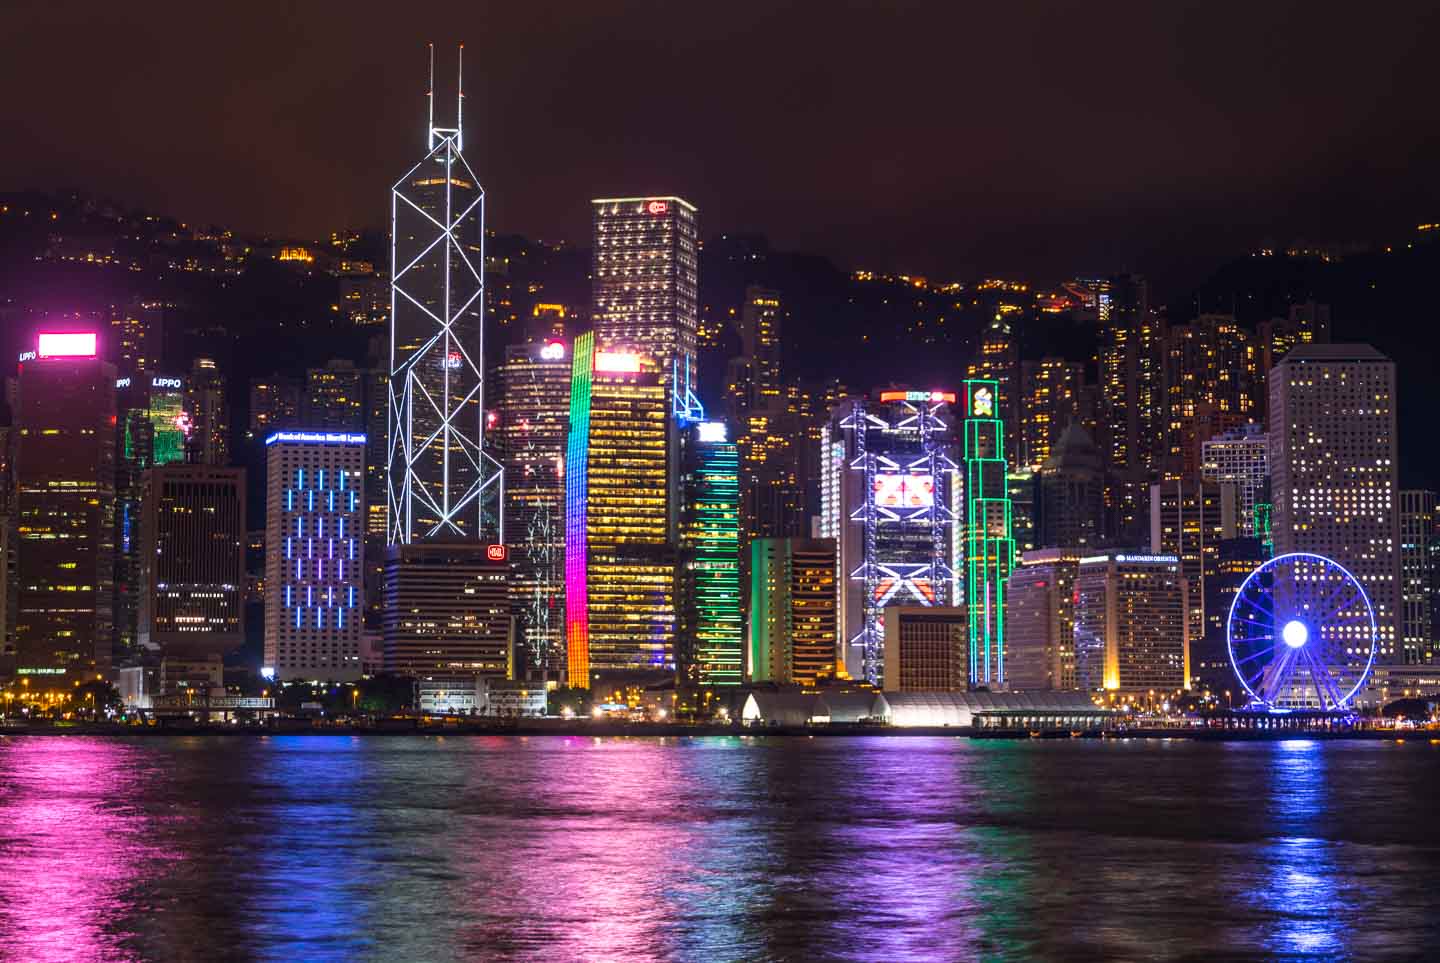 things-to-do-in-kowloon-hong-kong-island-skyline-at-night-from-kowloon